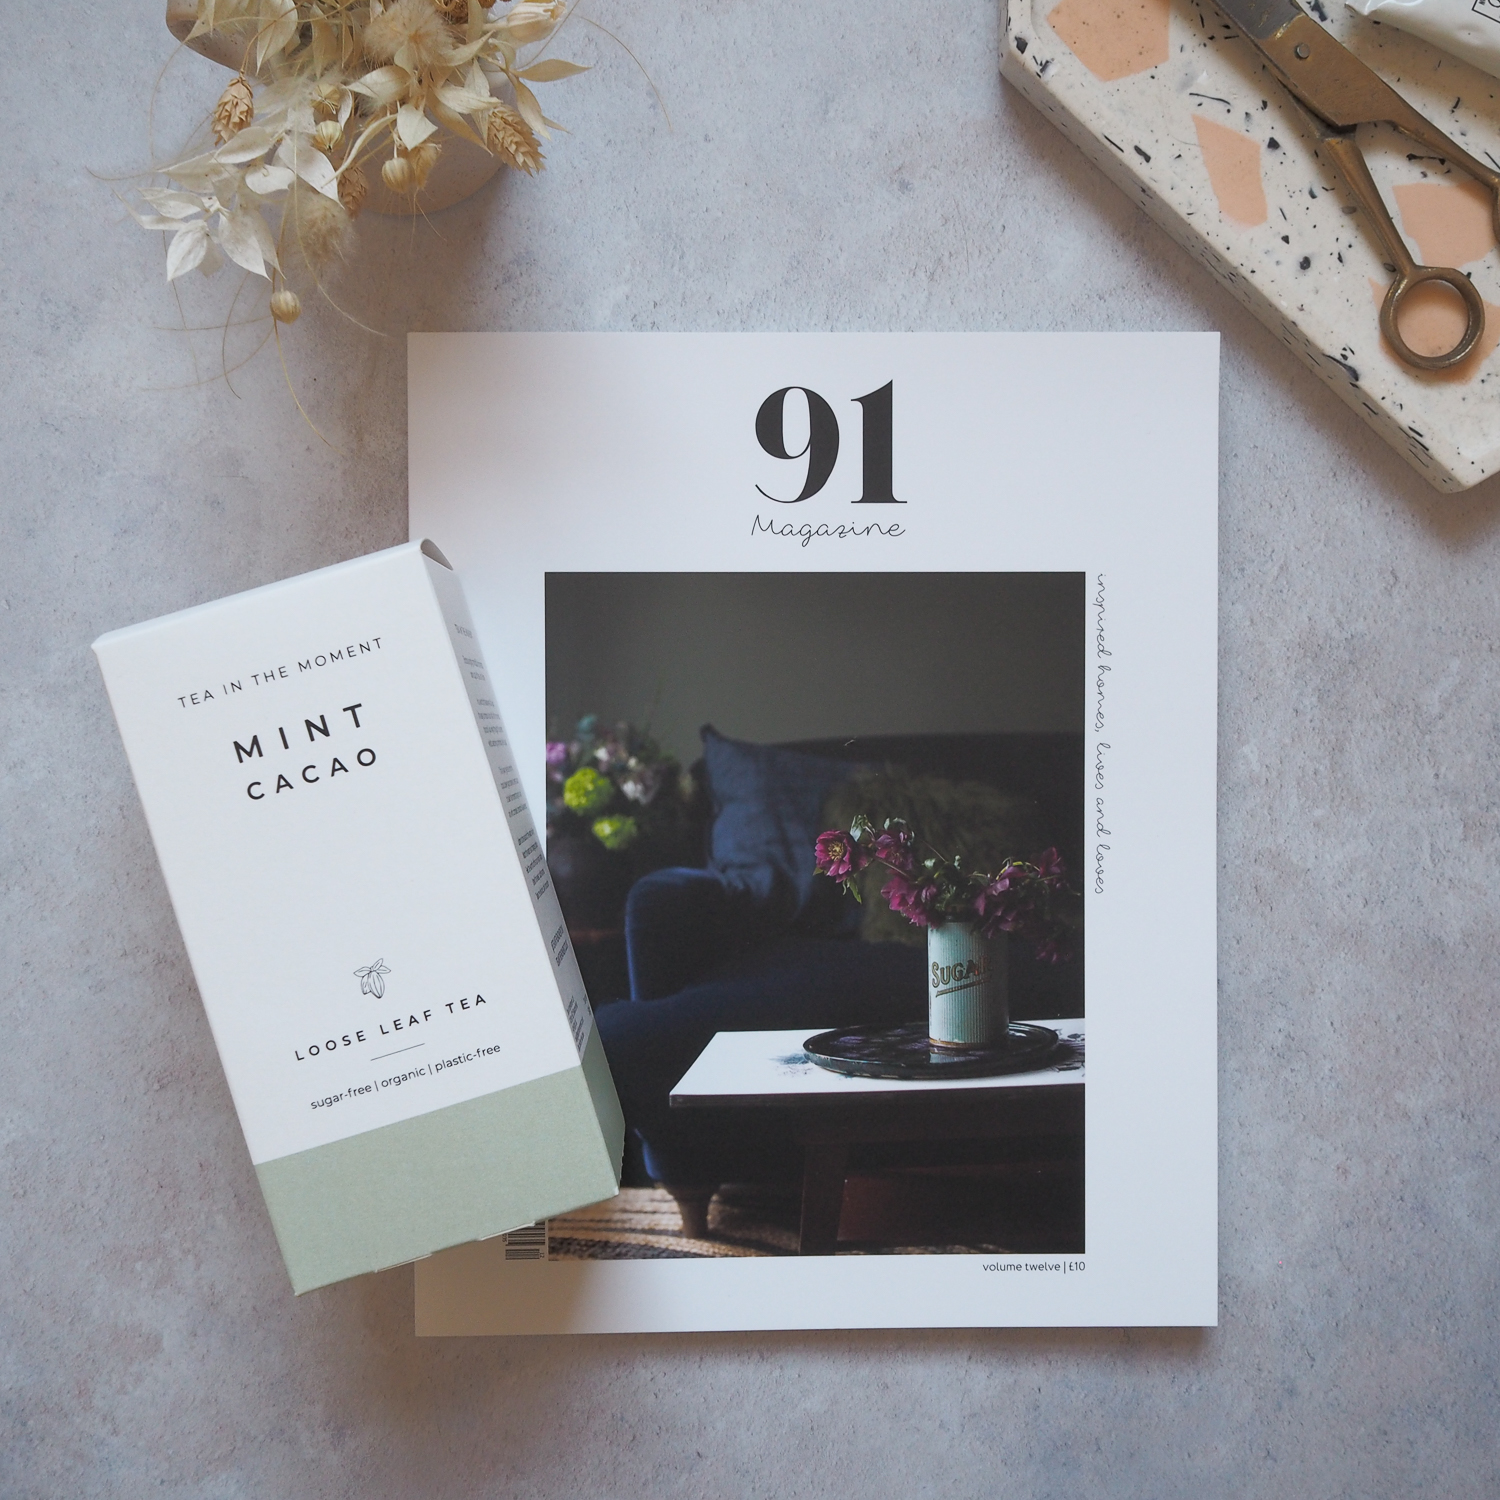 91 Magazine and Tea in the Moment Cacao tea